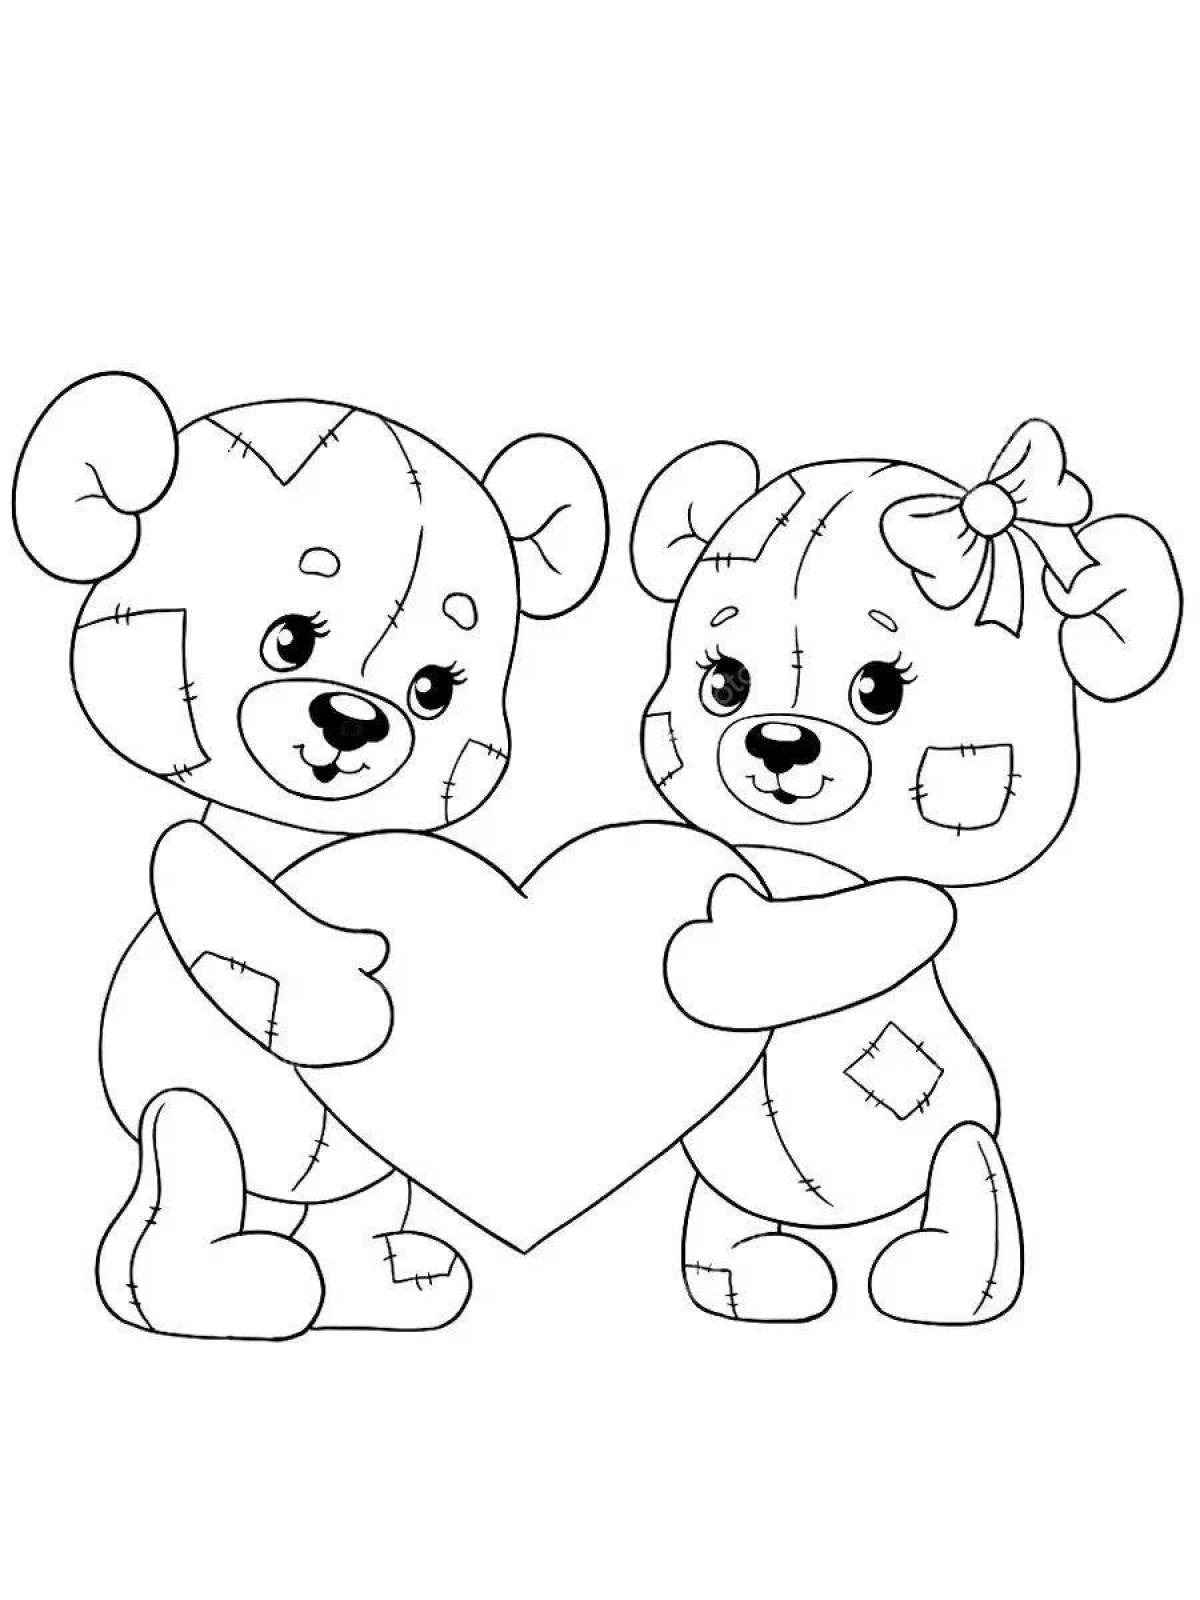 Coloring bright teddy bear with a heart